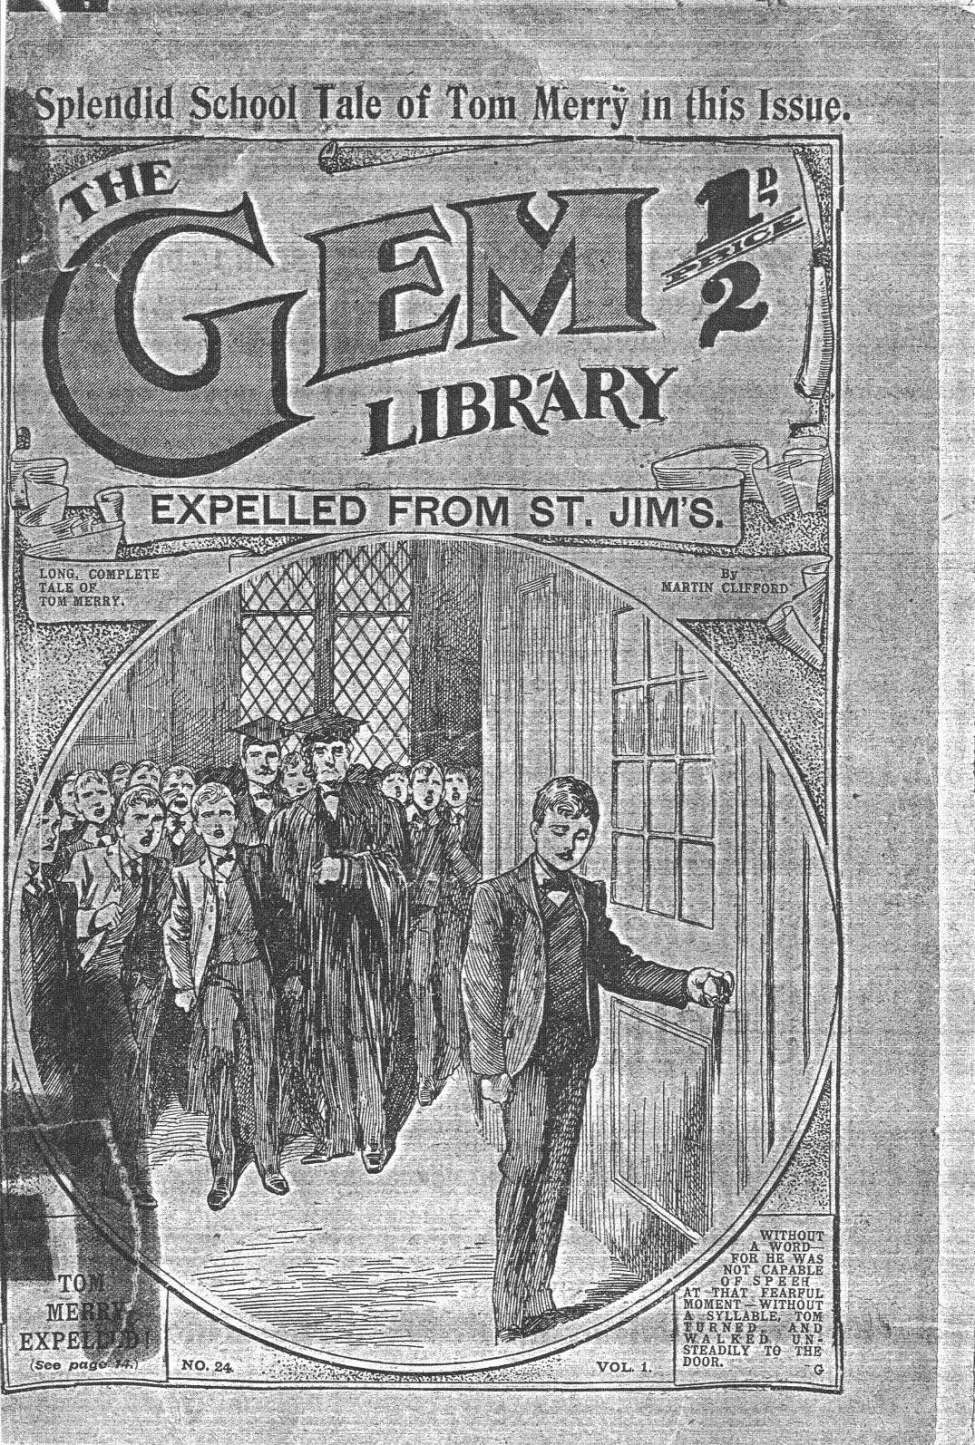 Book Cover For The Gem v1 24 - Expelled From St. Jim’s